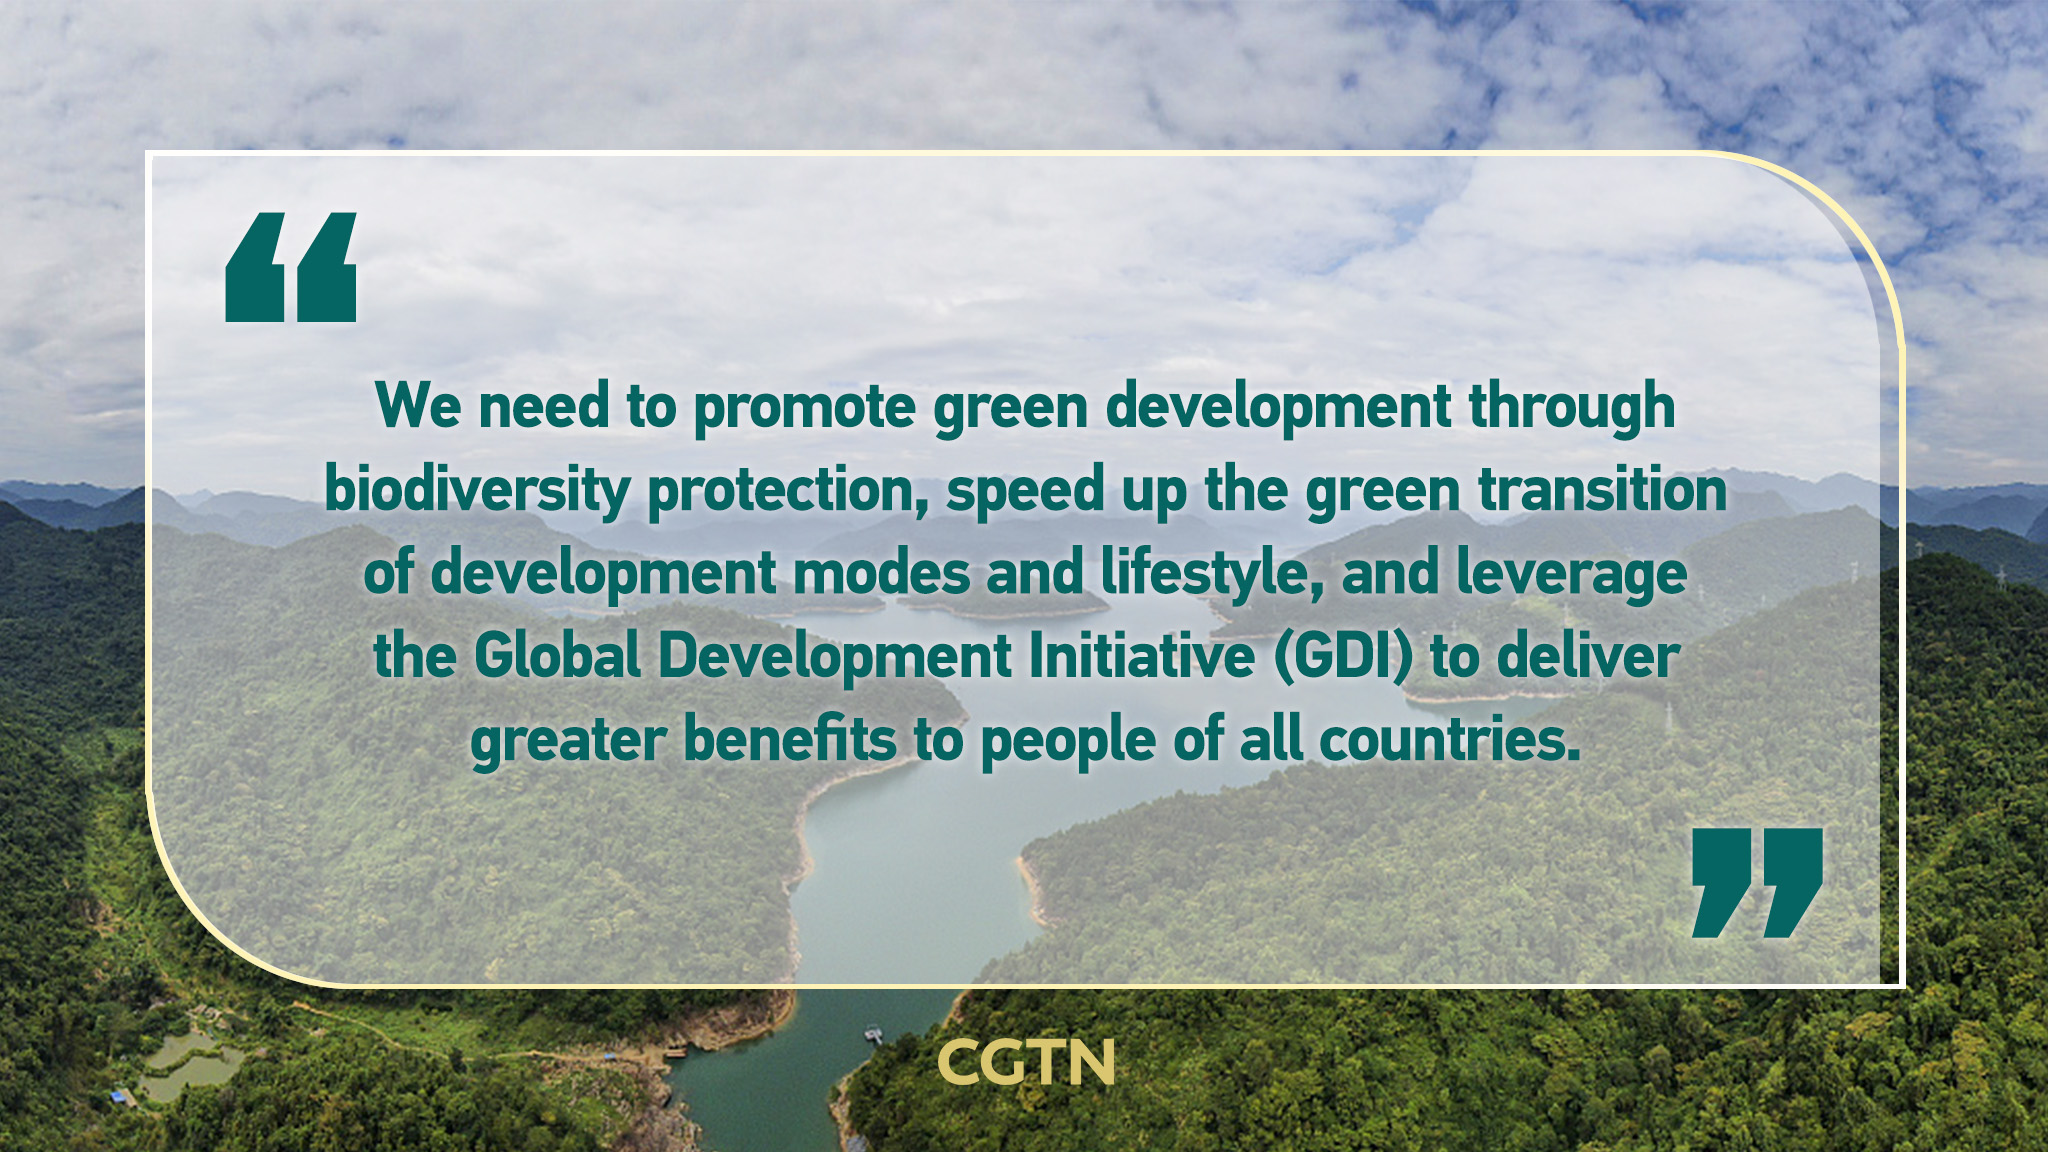 Key quotes from Xi Jinping at opening ceremony of high-level segment of COP15 part 2